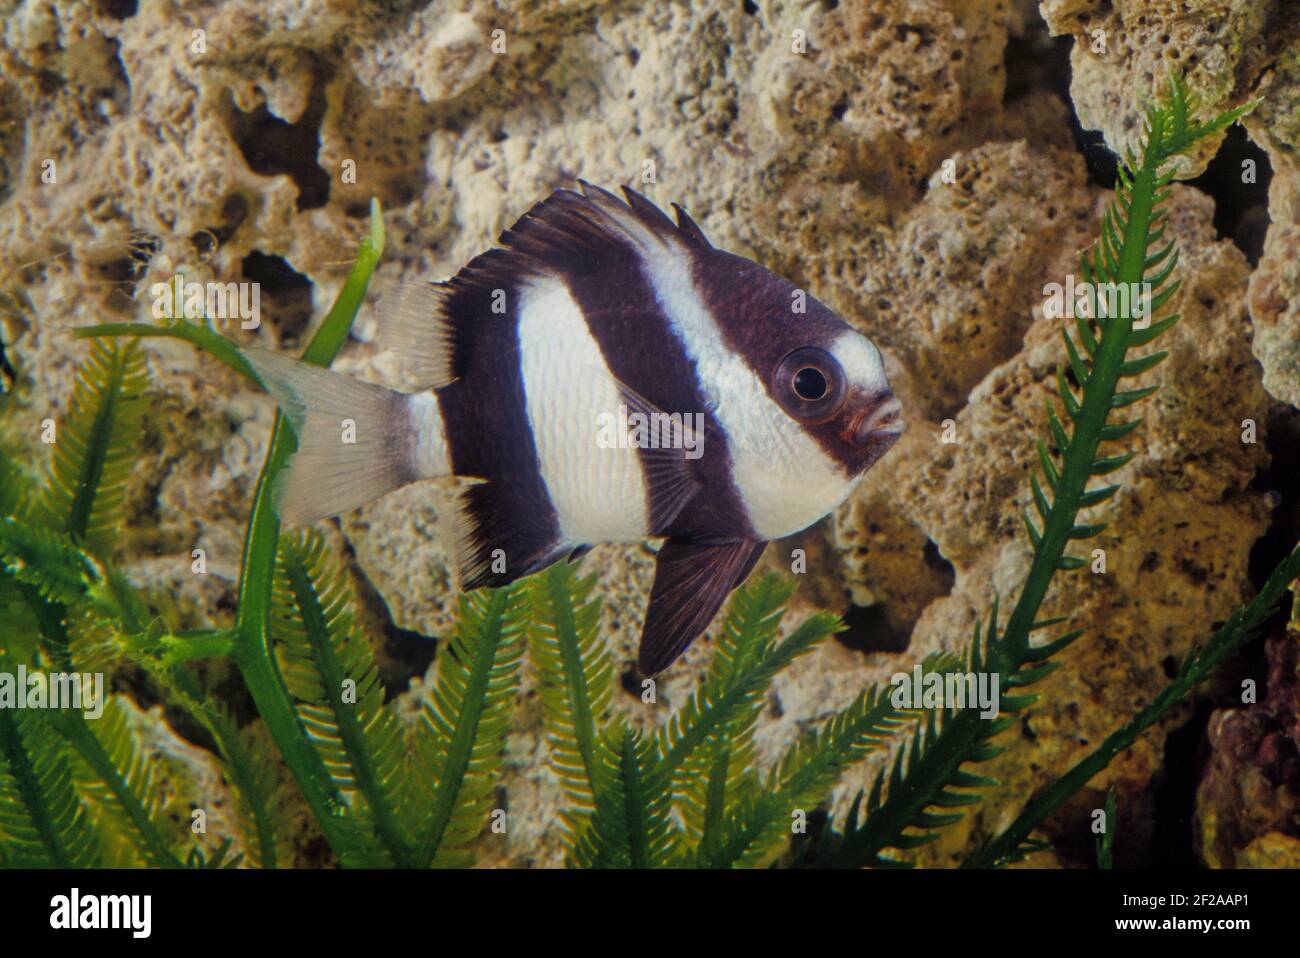 Dascyllus aruanus, known commonly as the whitetail dascyllus or humbug damselfish among other vernacular names, is a species of marine fish in the fam Stock Photo